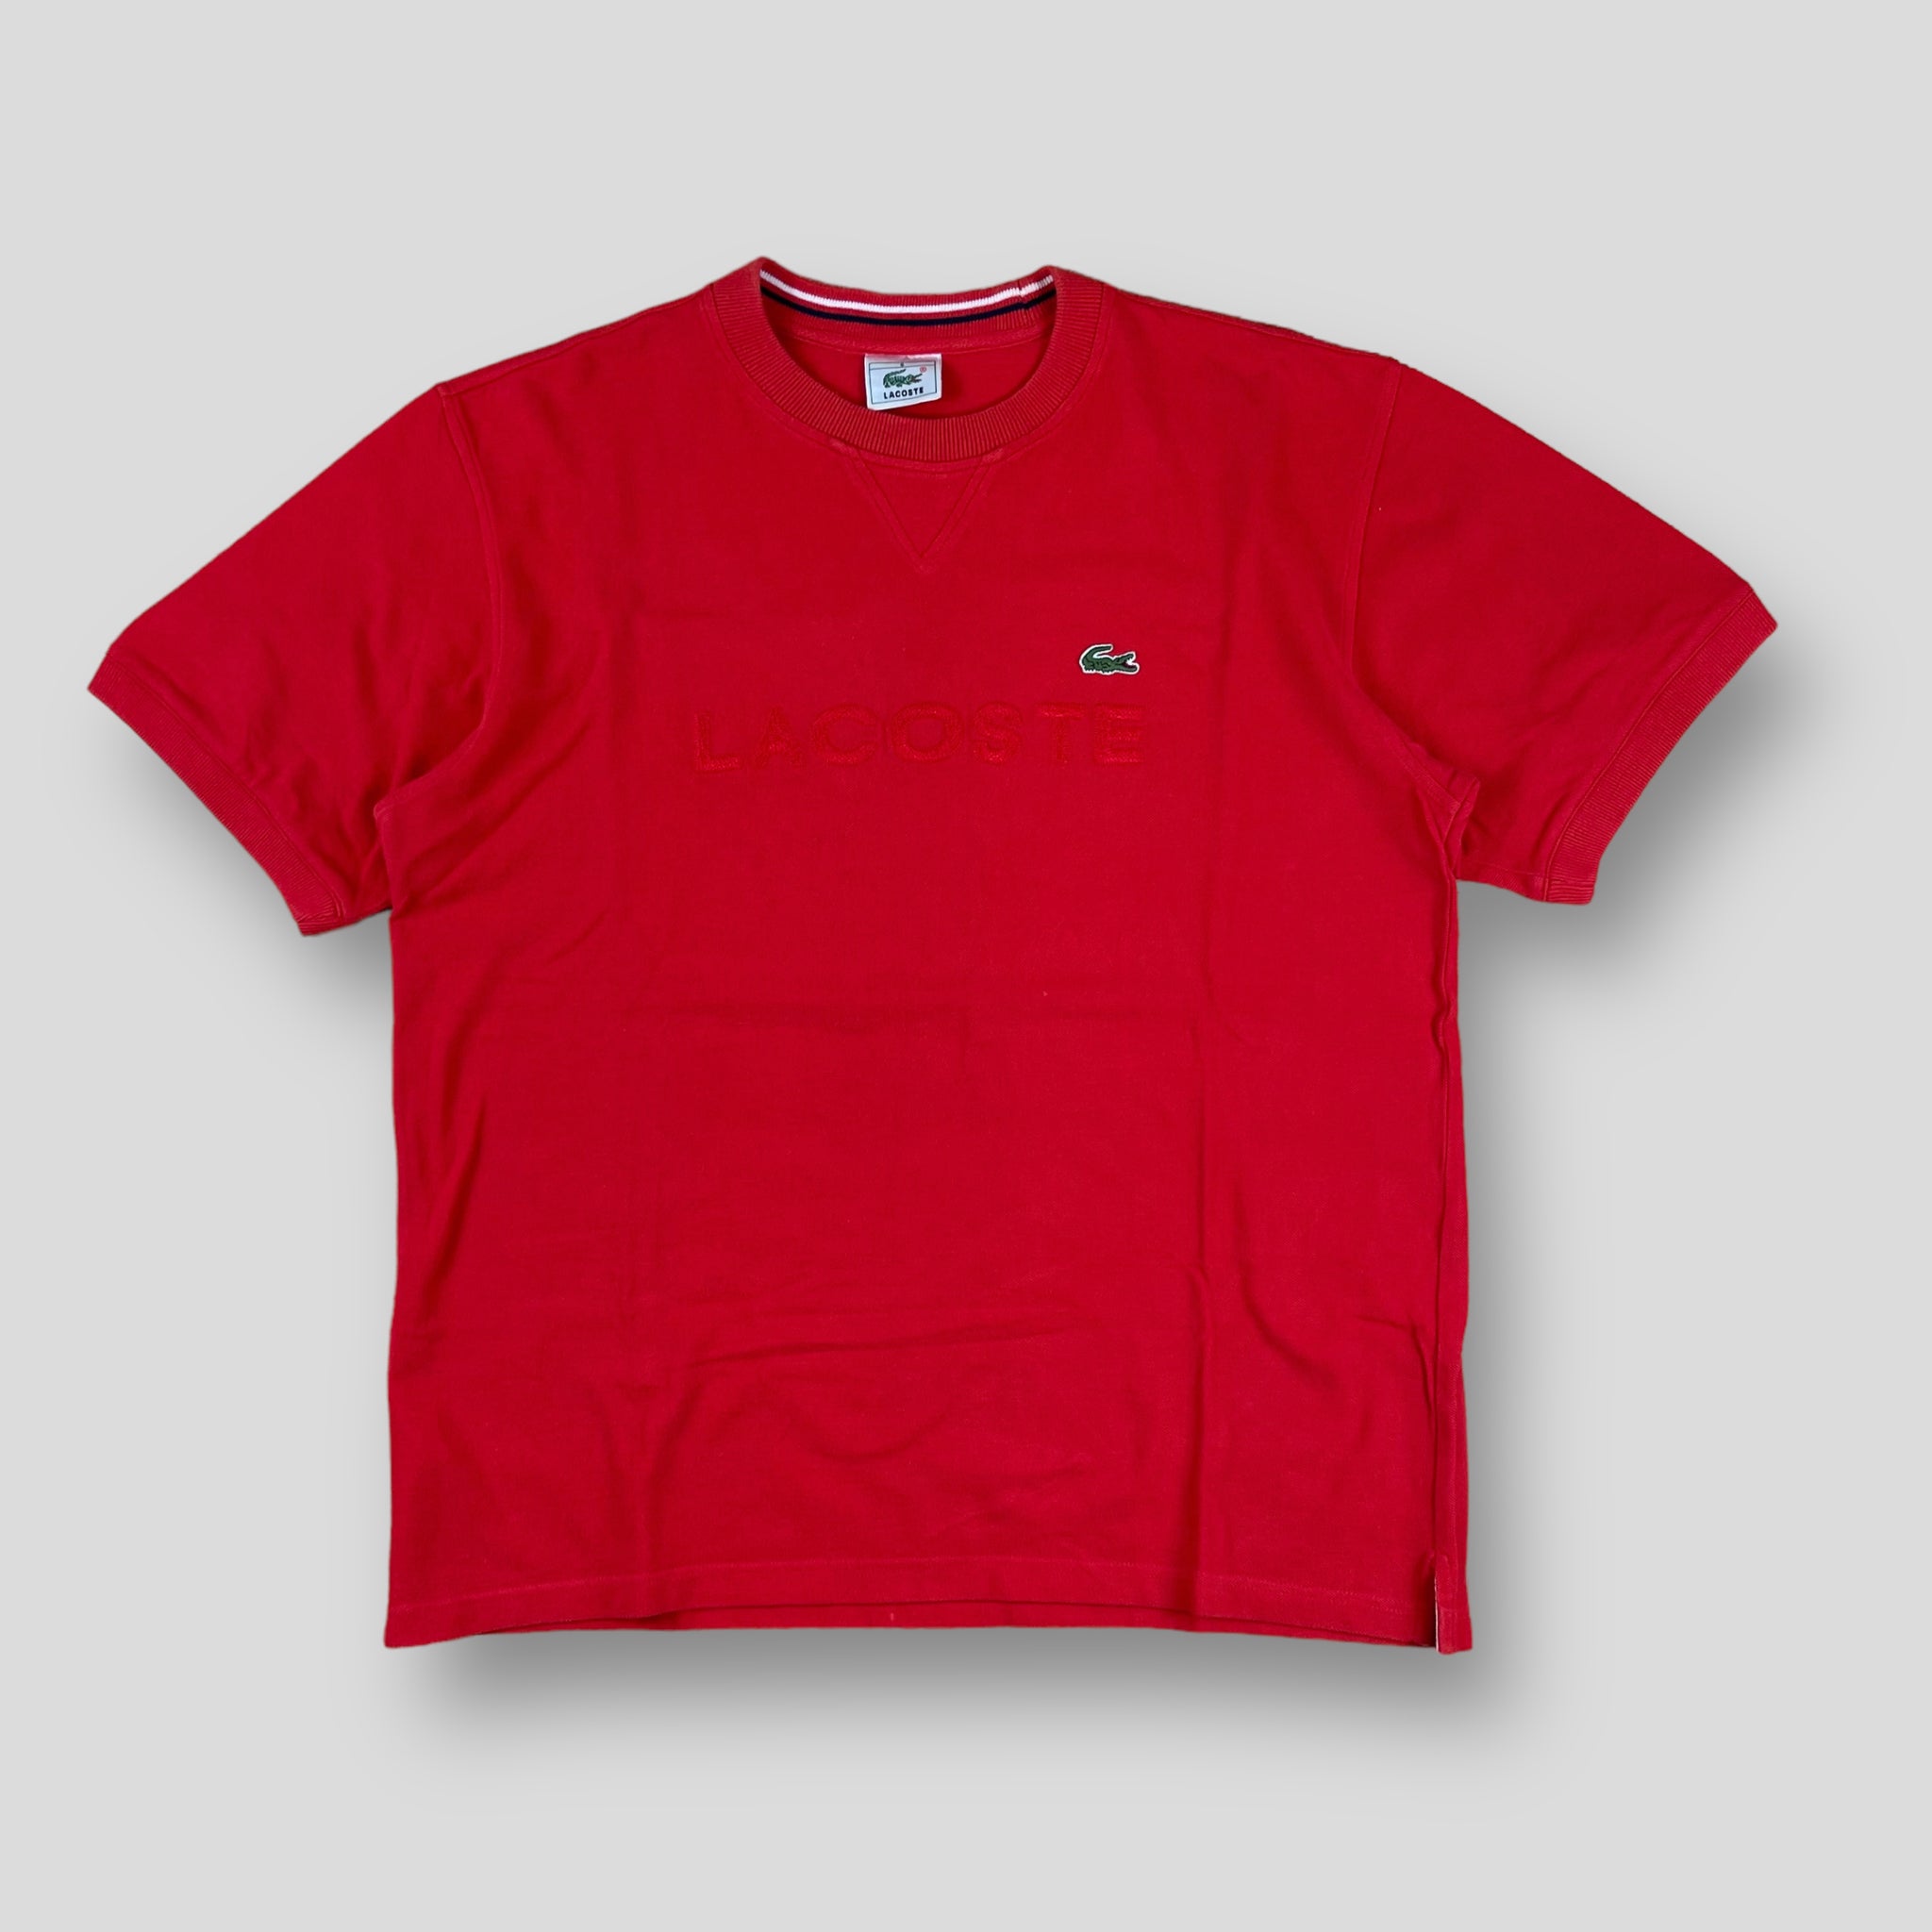 Lacoste red T-shirt